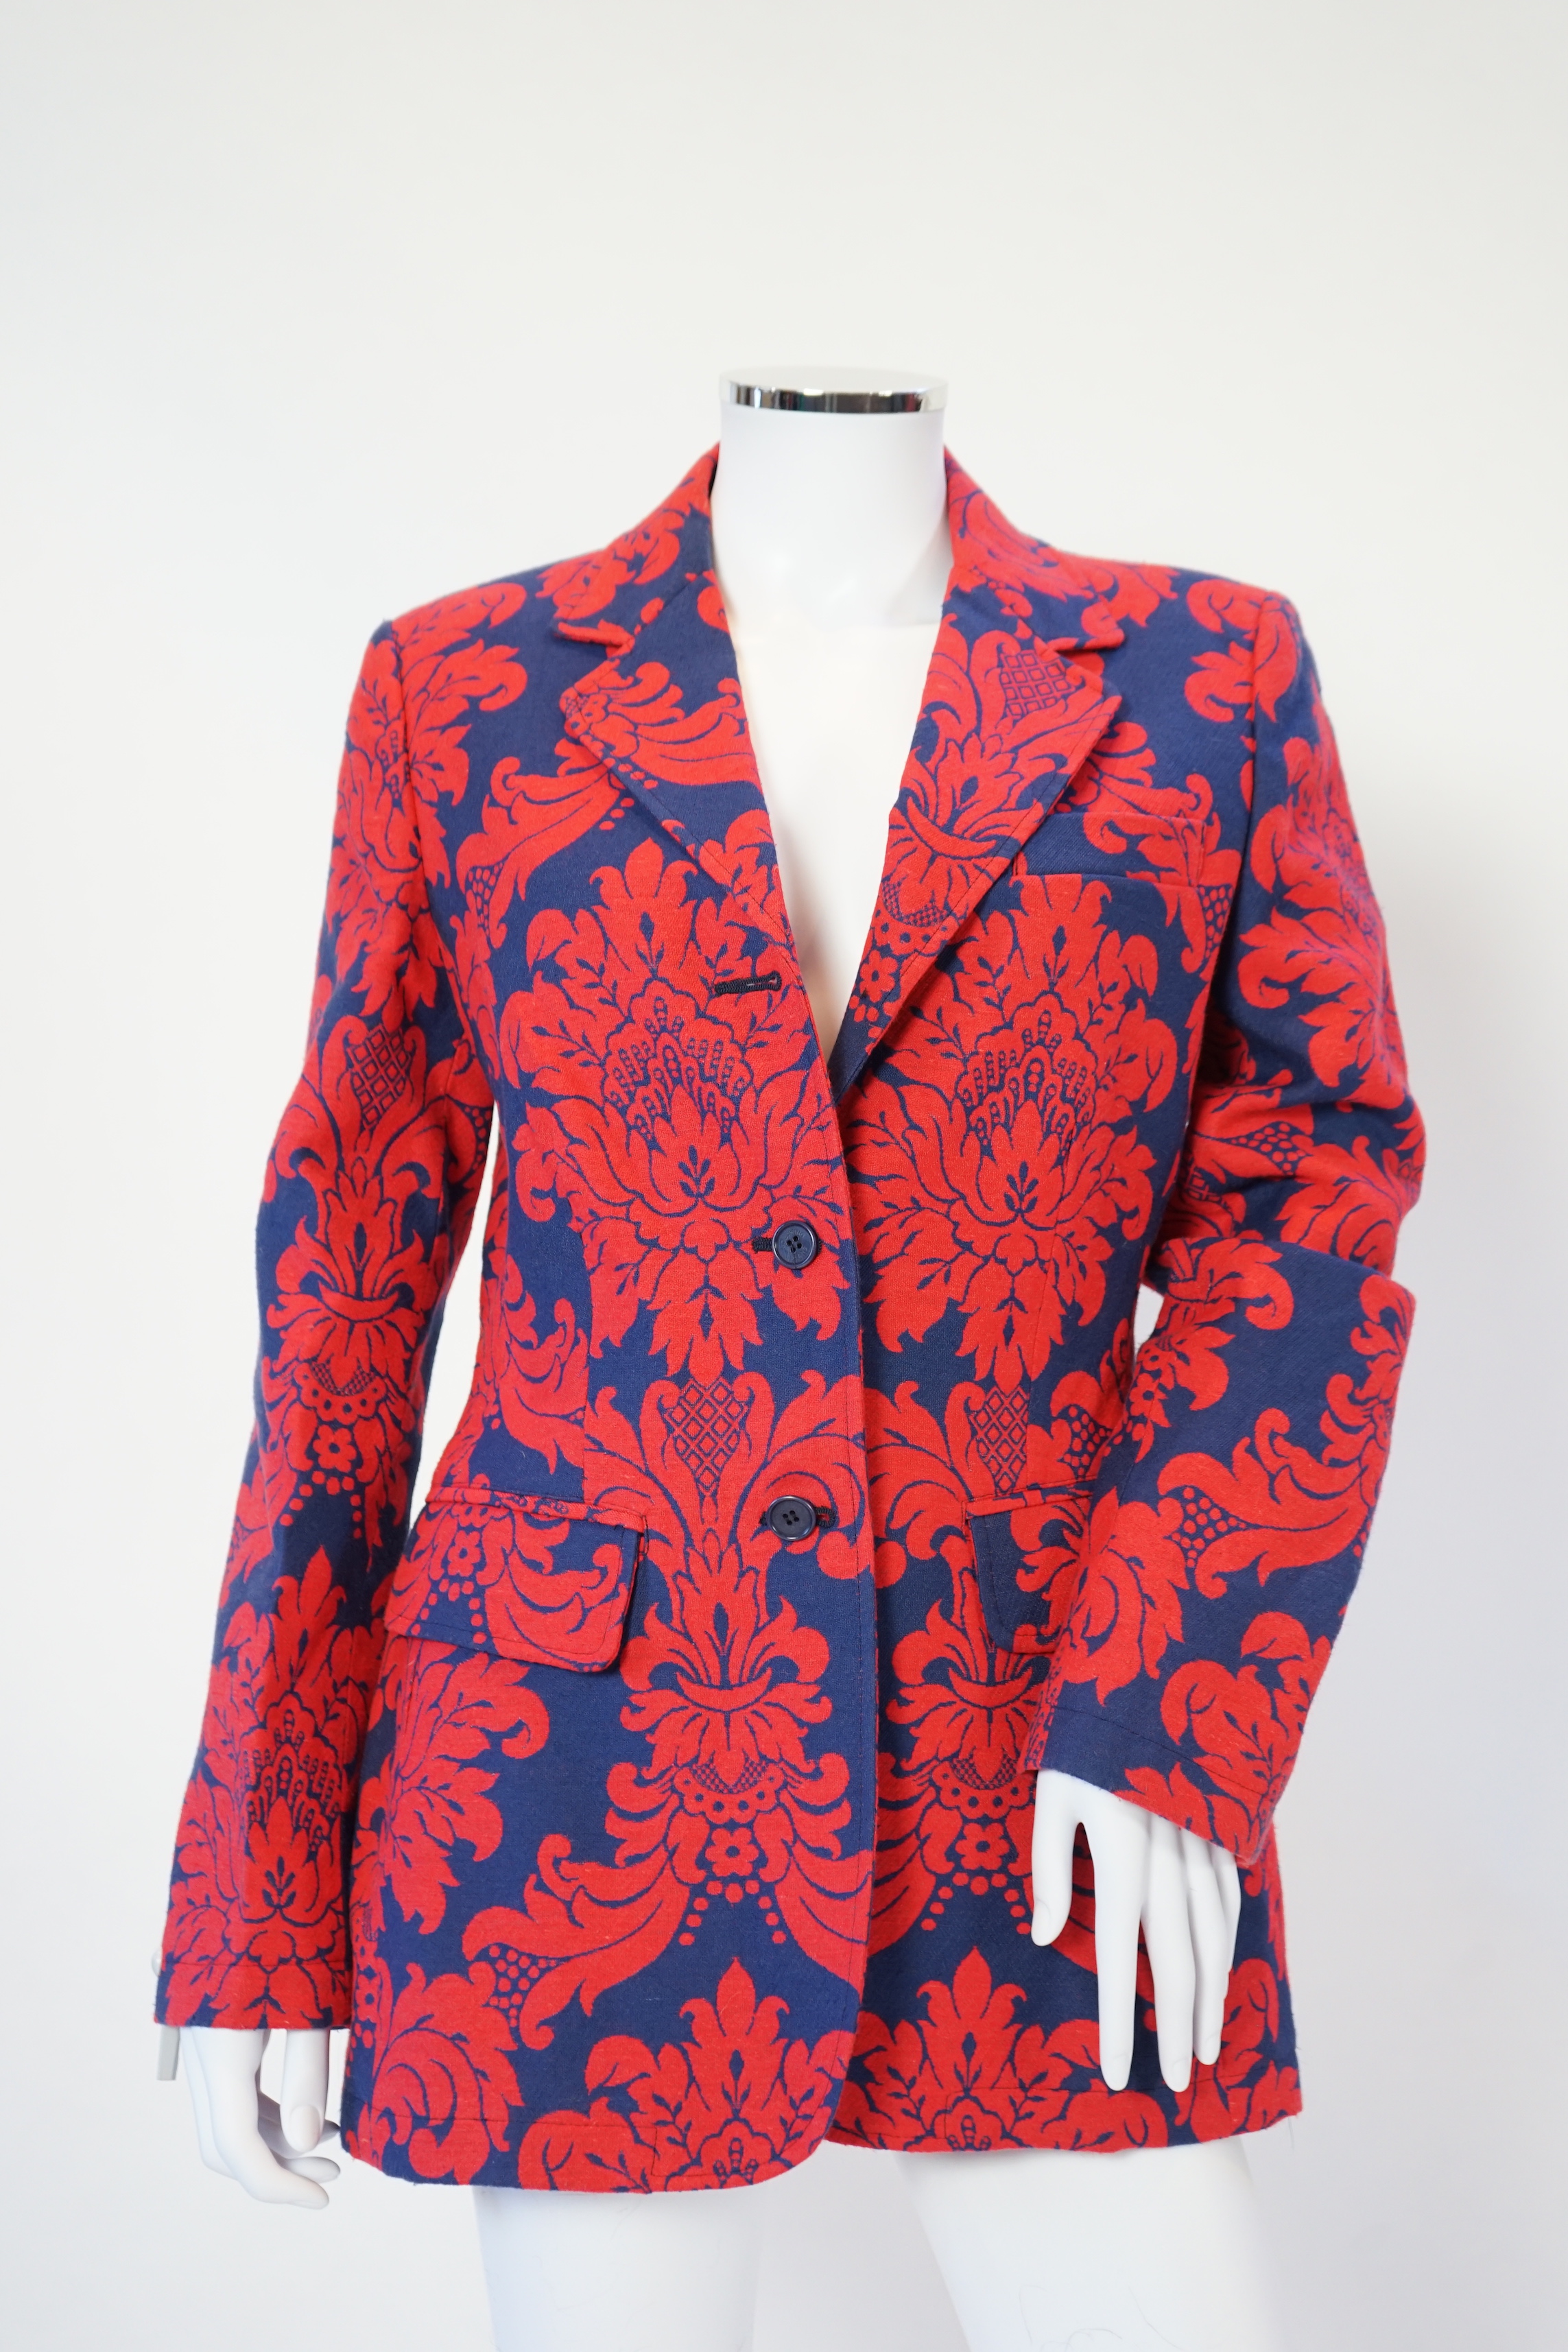 A Moschino lady's long blue and red jacket, a cream cotton embellished blazer and a cotton pair of floral trousers, blue and red jacket size 14, cream blazer size 12, trousers size: 10